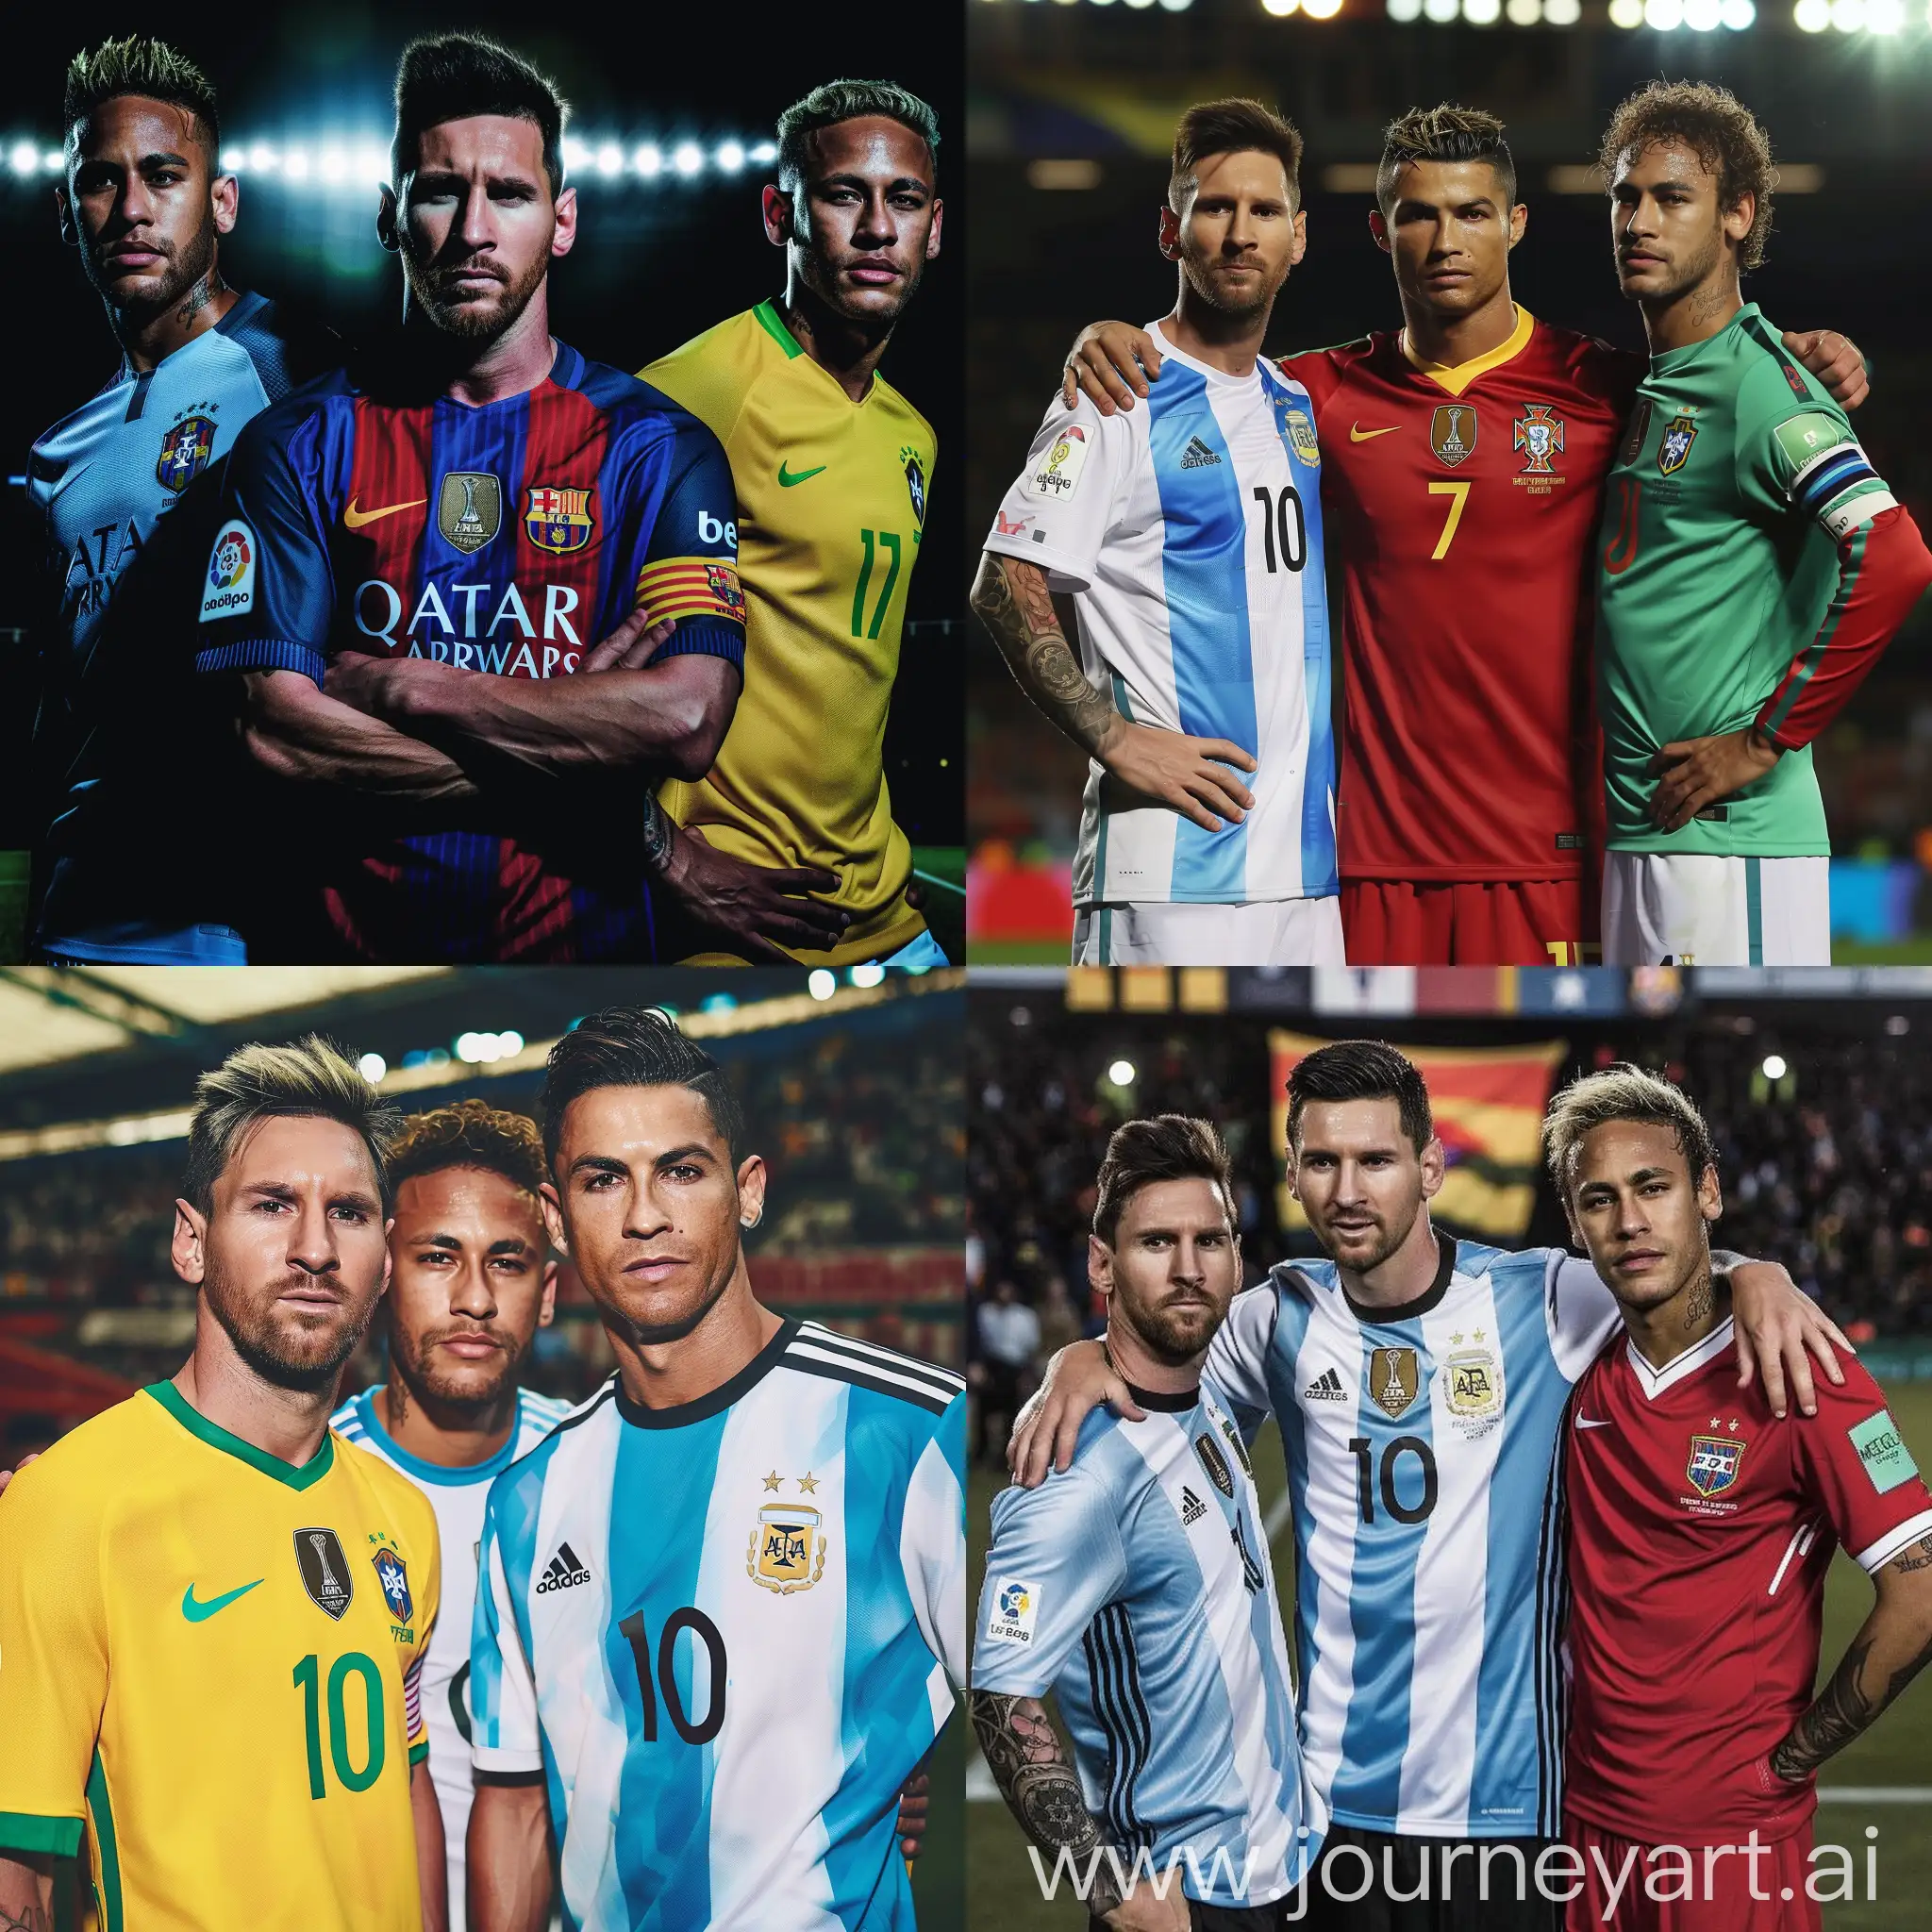 Soccer-Legends-Messi-Ronaldo-and-Neymar-in-ActionWearing-National-Team-Kits